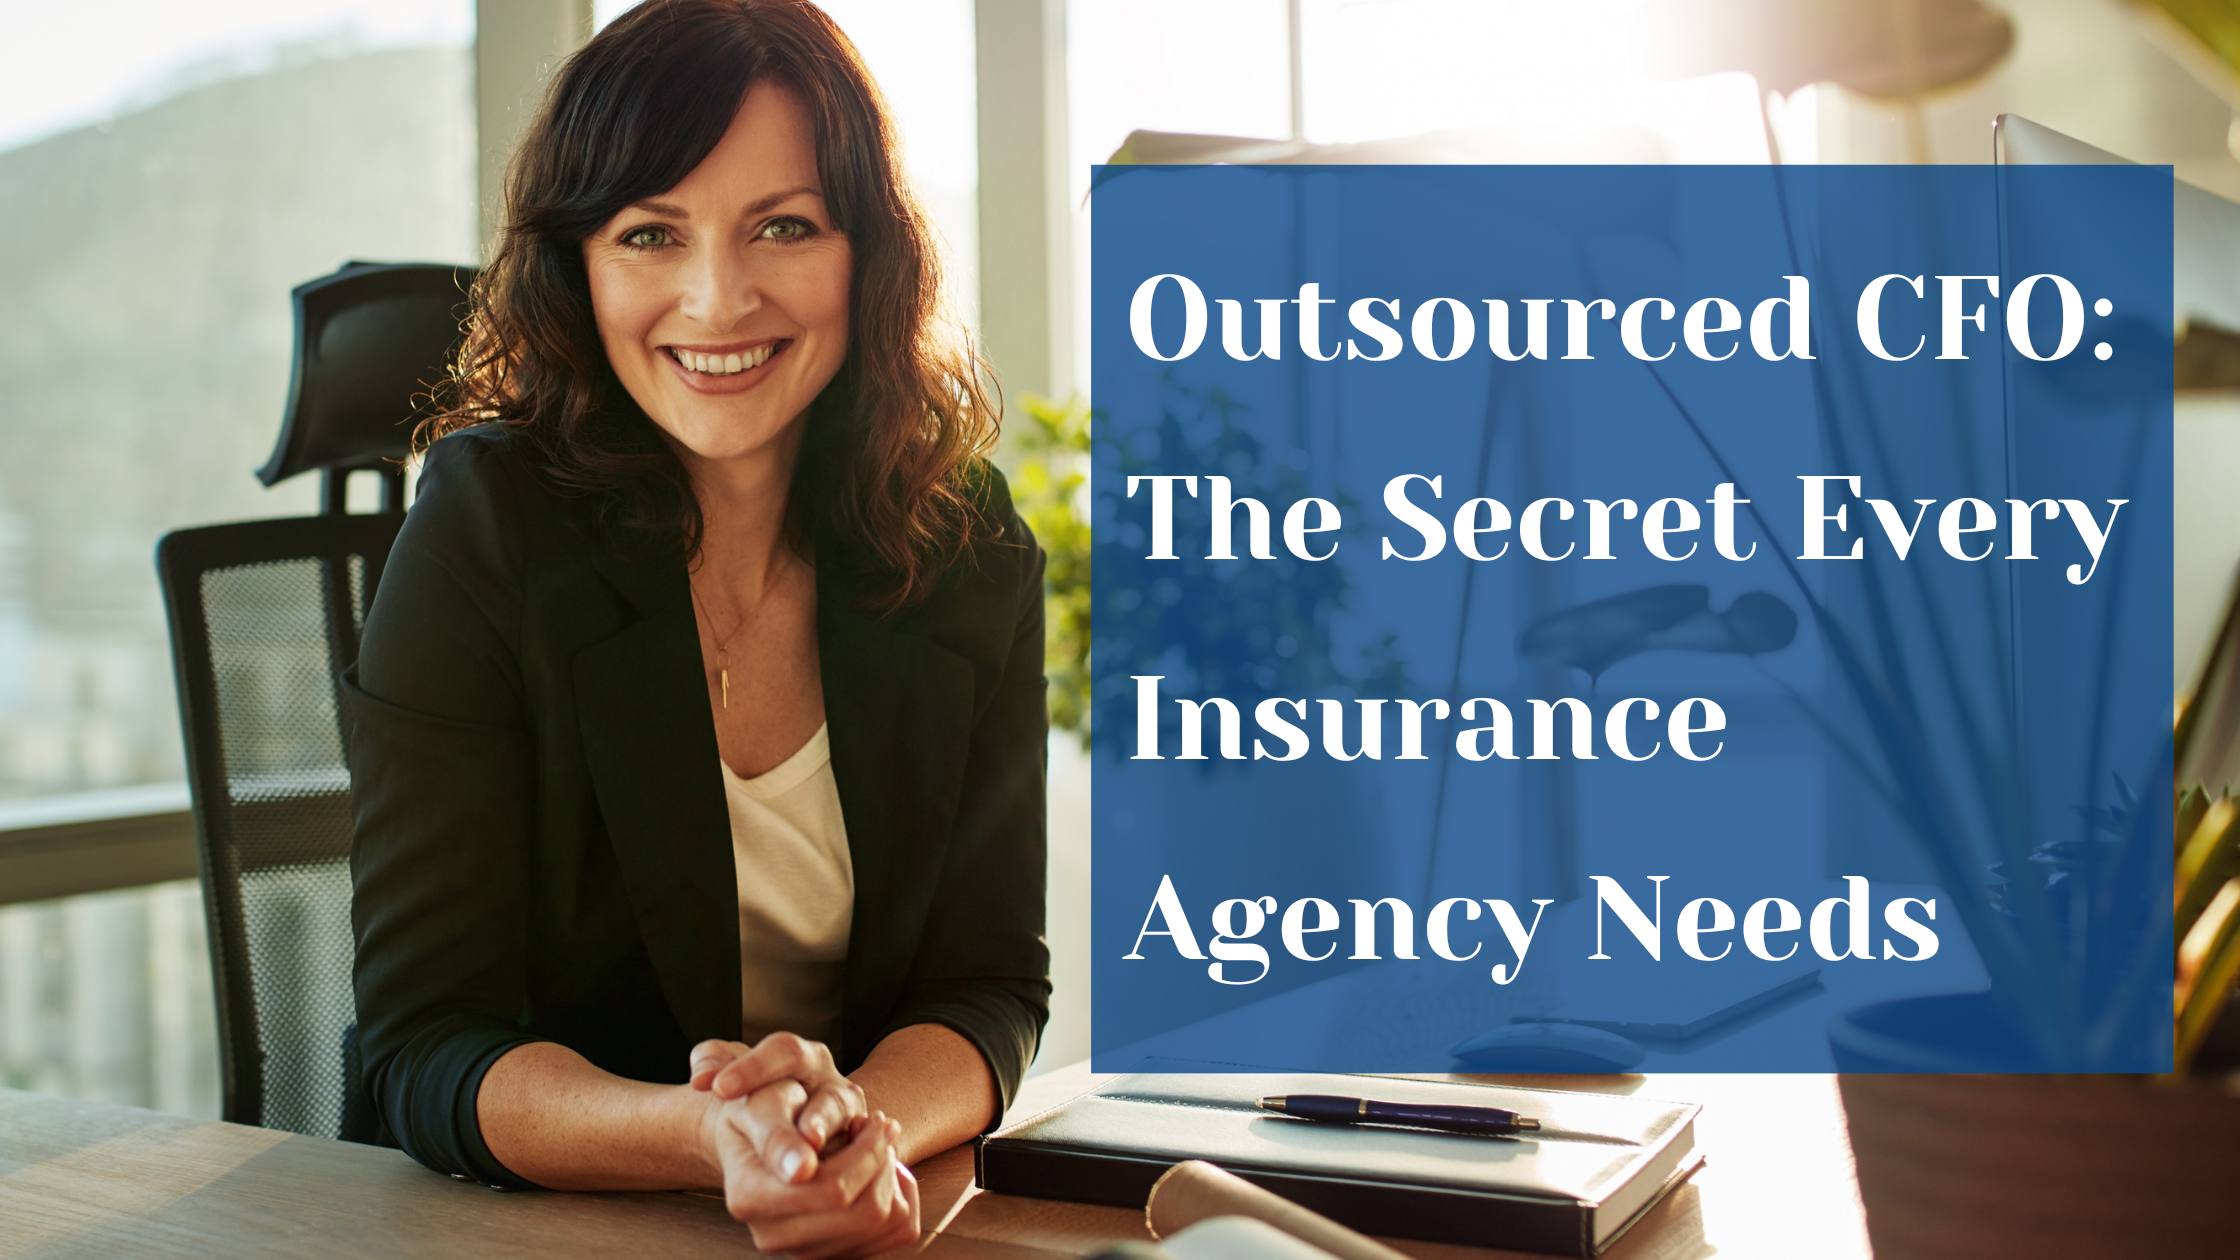 Outsourced CFO: The Secret Every Insurance Agency Needs